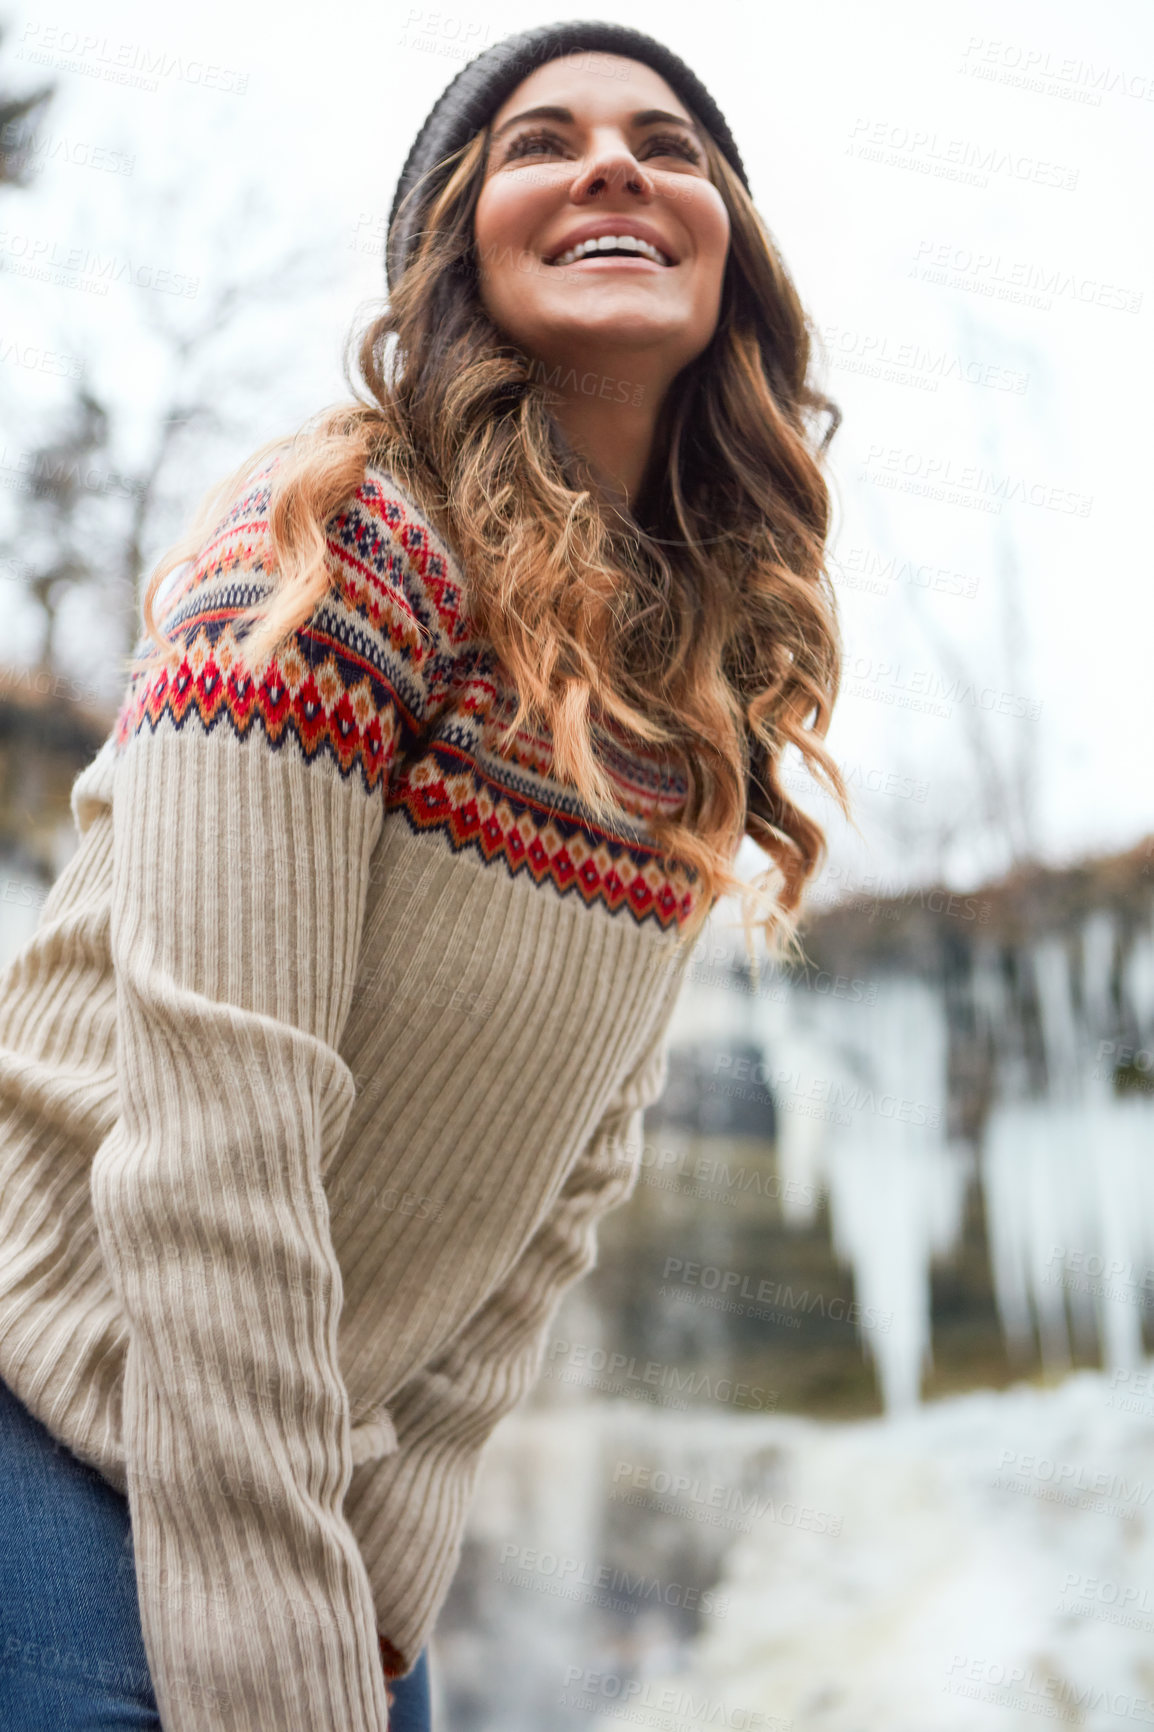 Buy stock photo Cropped shot of an attractive young woman spending the day outside during winter